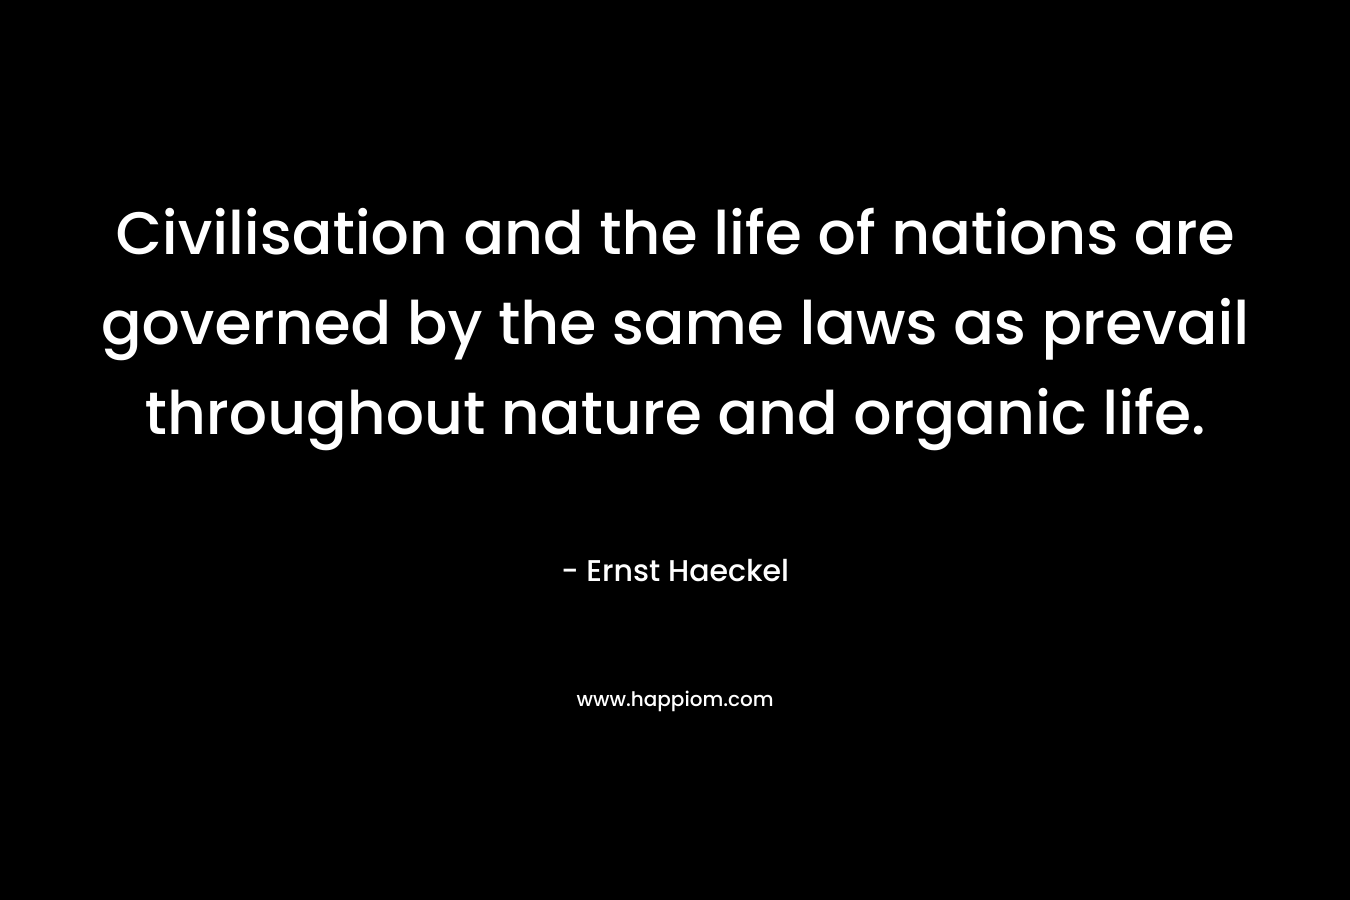 Civilisation and the life of nations are governed by the same laws as prevail throughout nature and organic life. – Ernst Haeckel